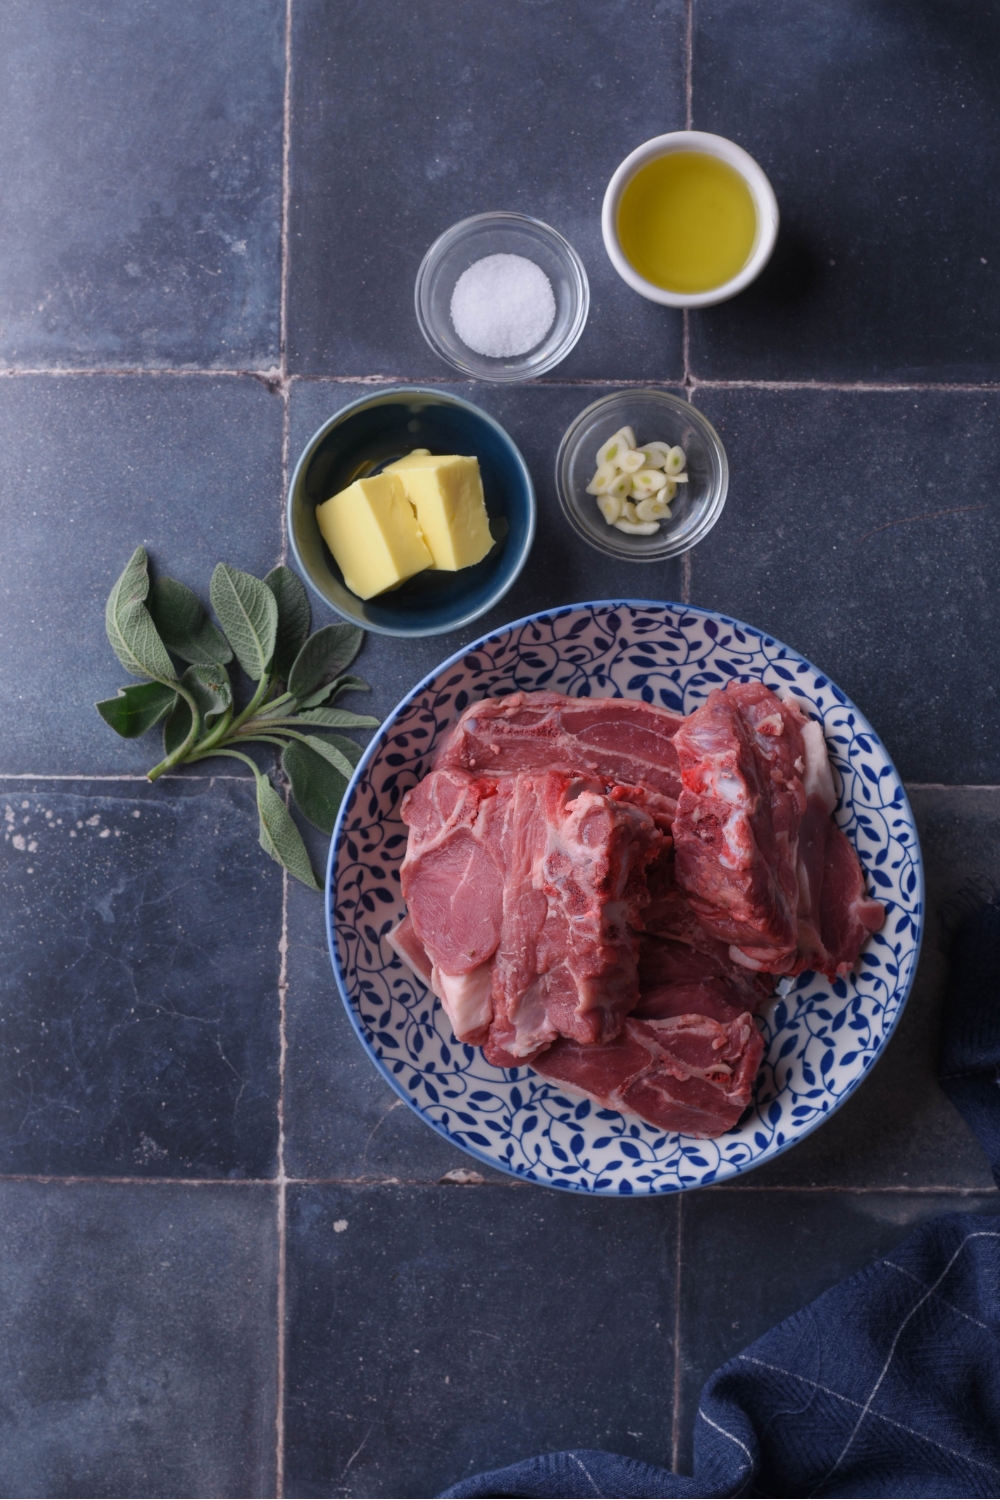 An assortment of ingredients including a plate of raw lamb and bowls of oil, salt, garlic, butter, and a sprig of fresh sage.